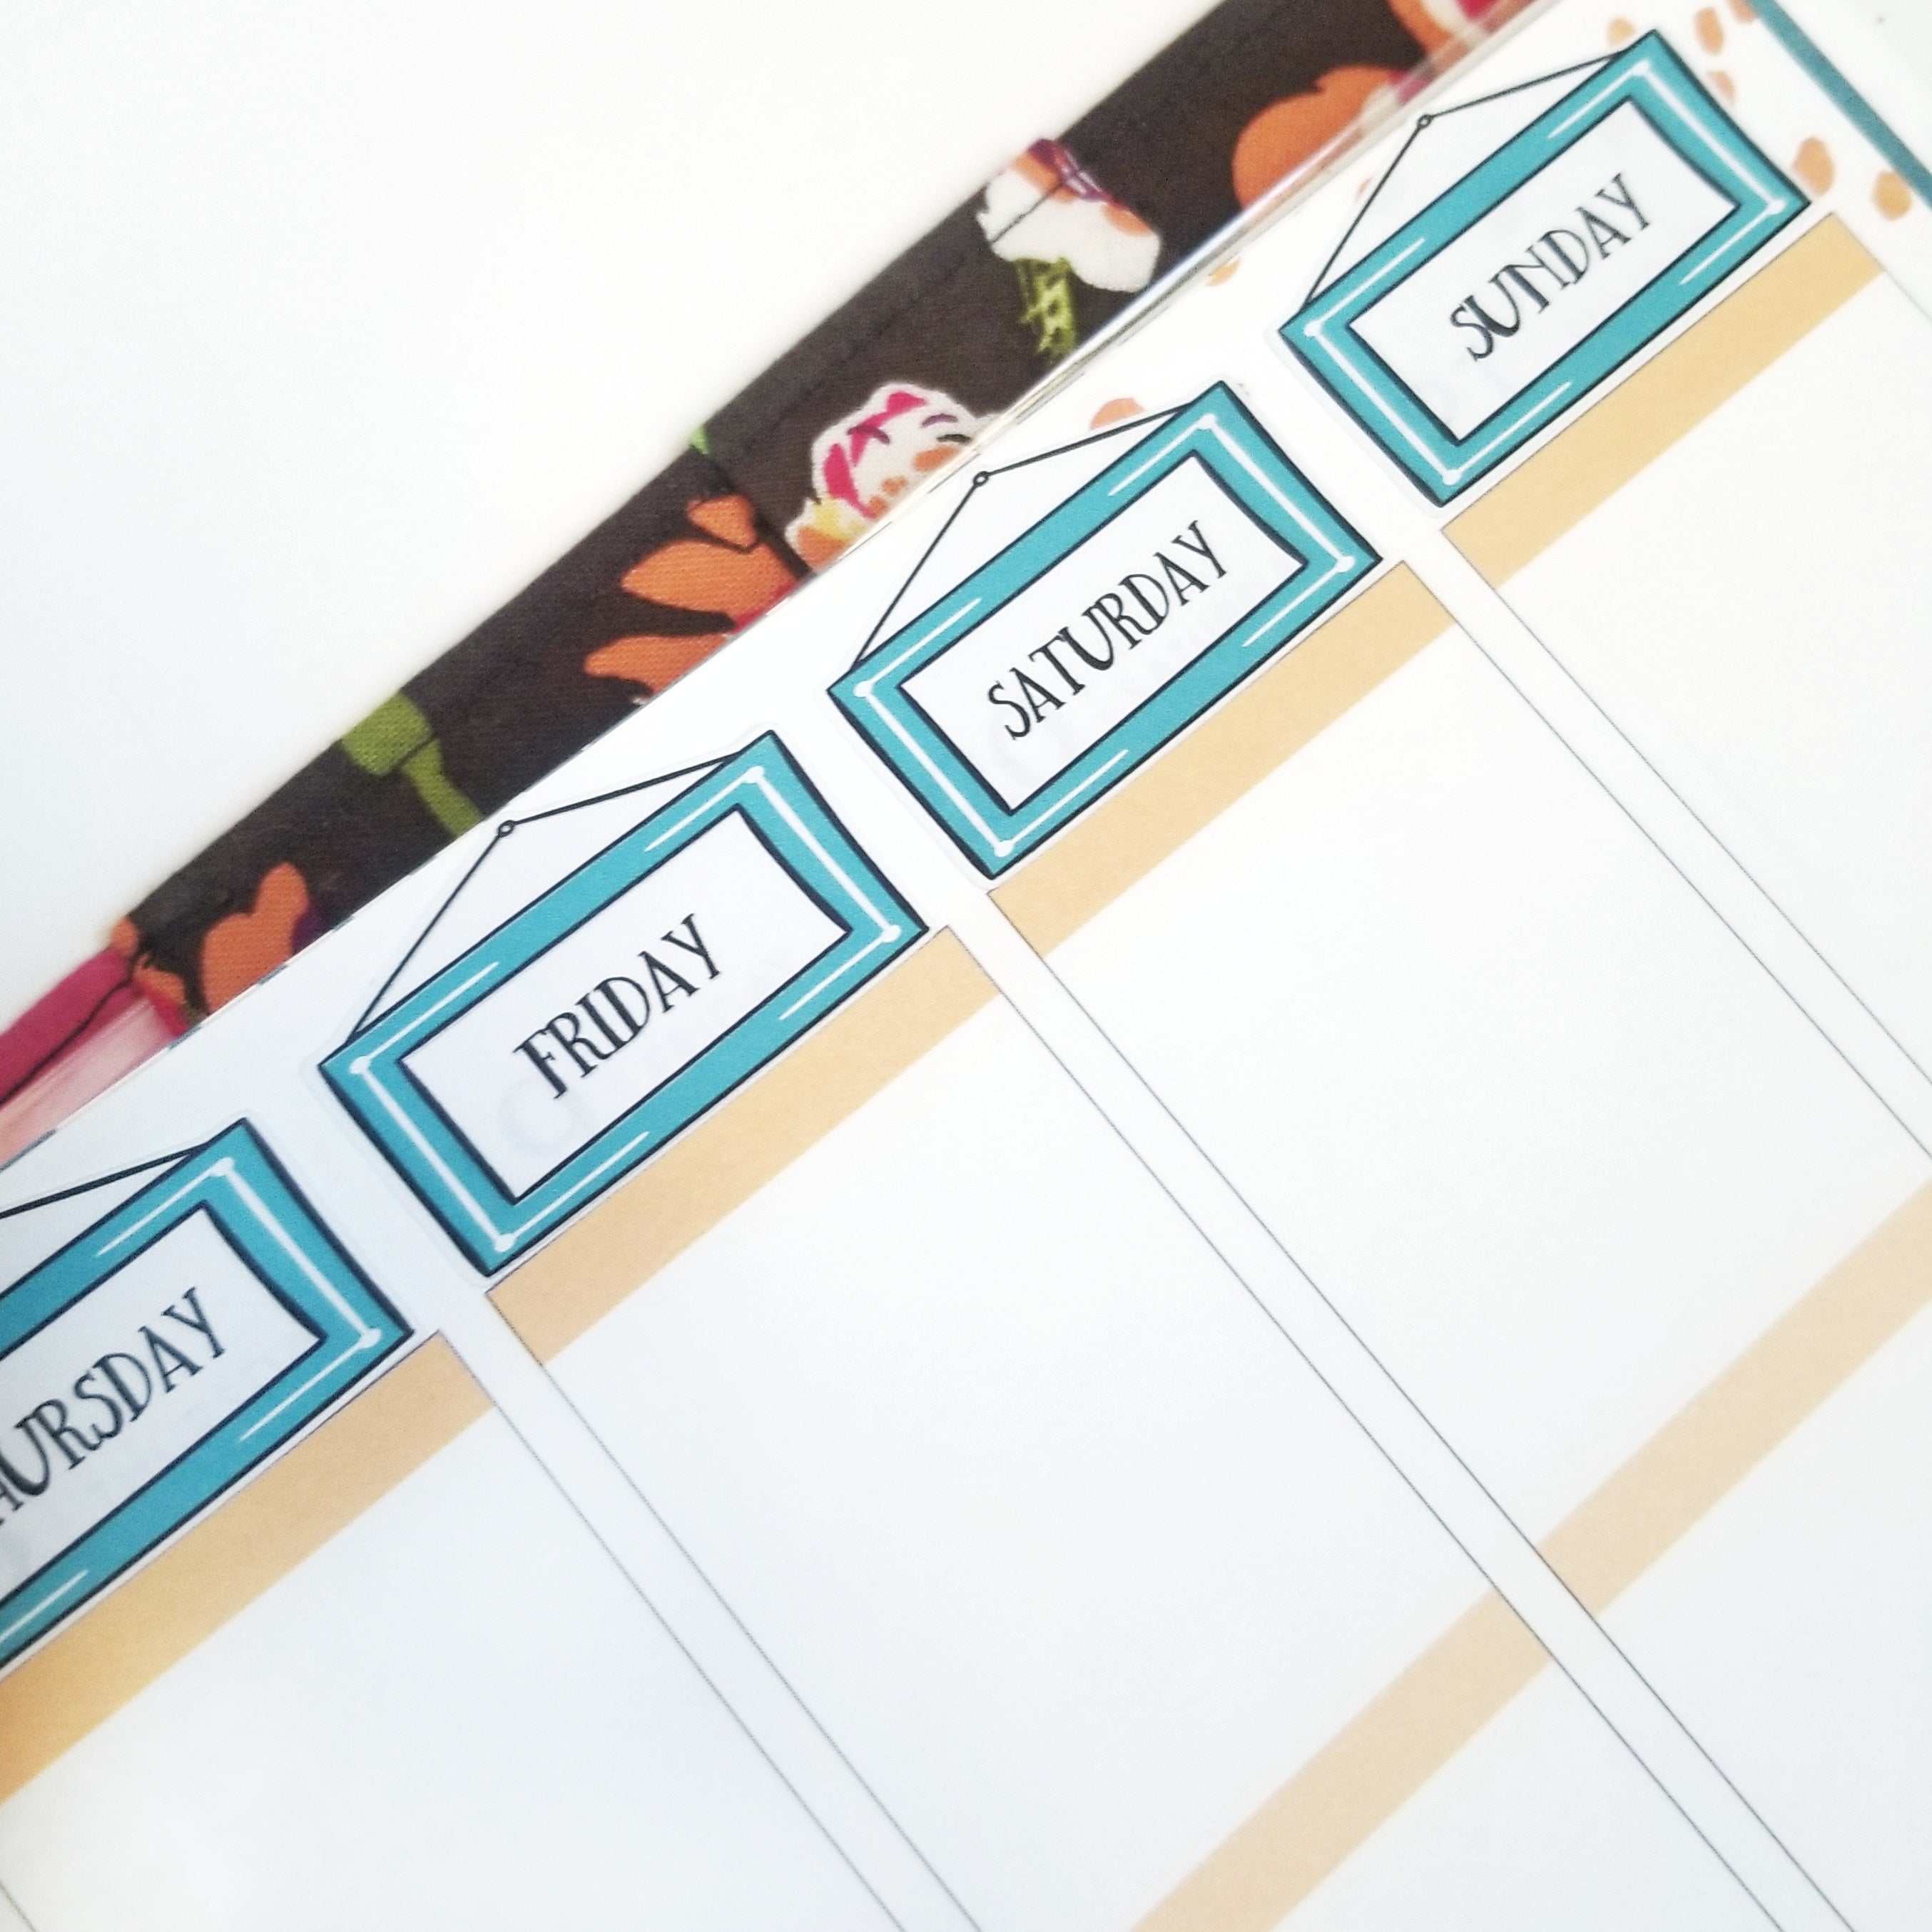 PICTURE FRAME DATE COVERS Planner Stickers | All Colors Available